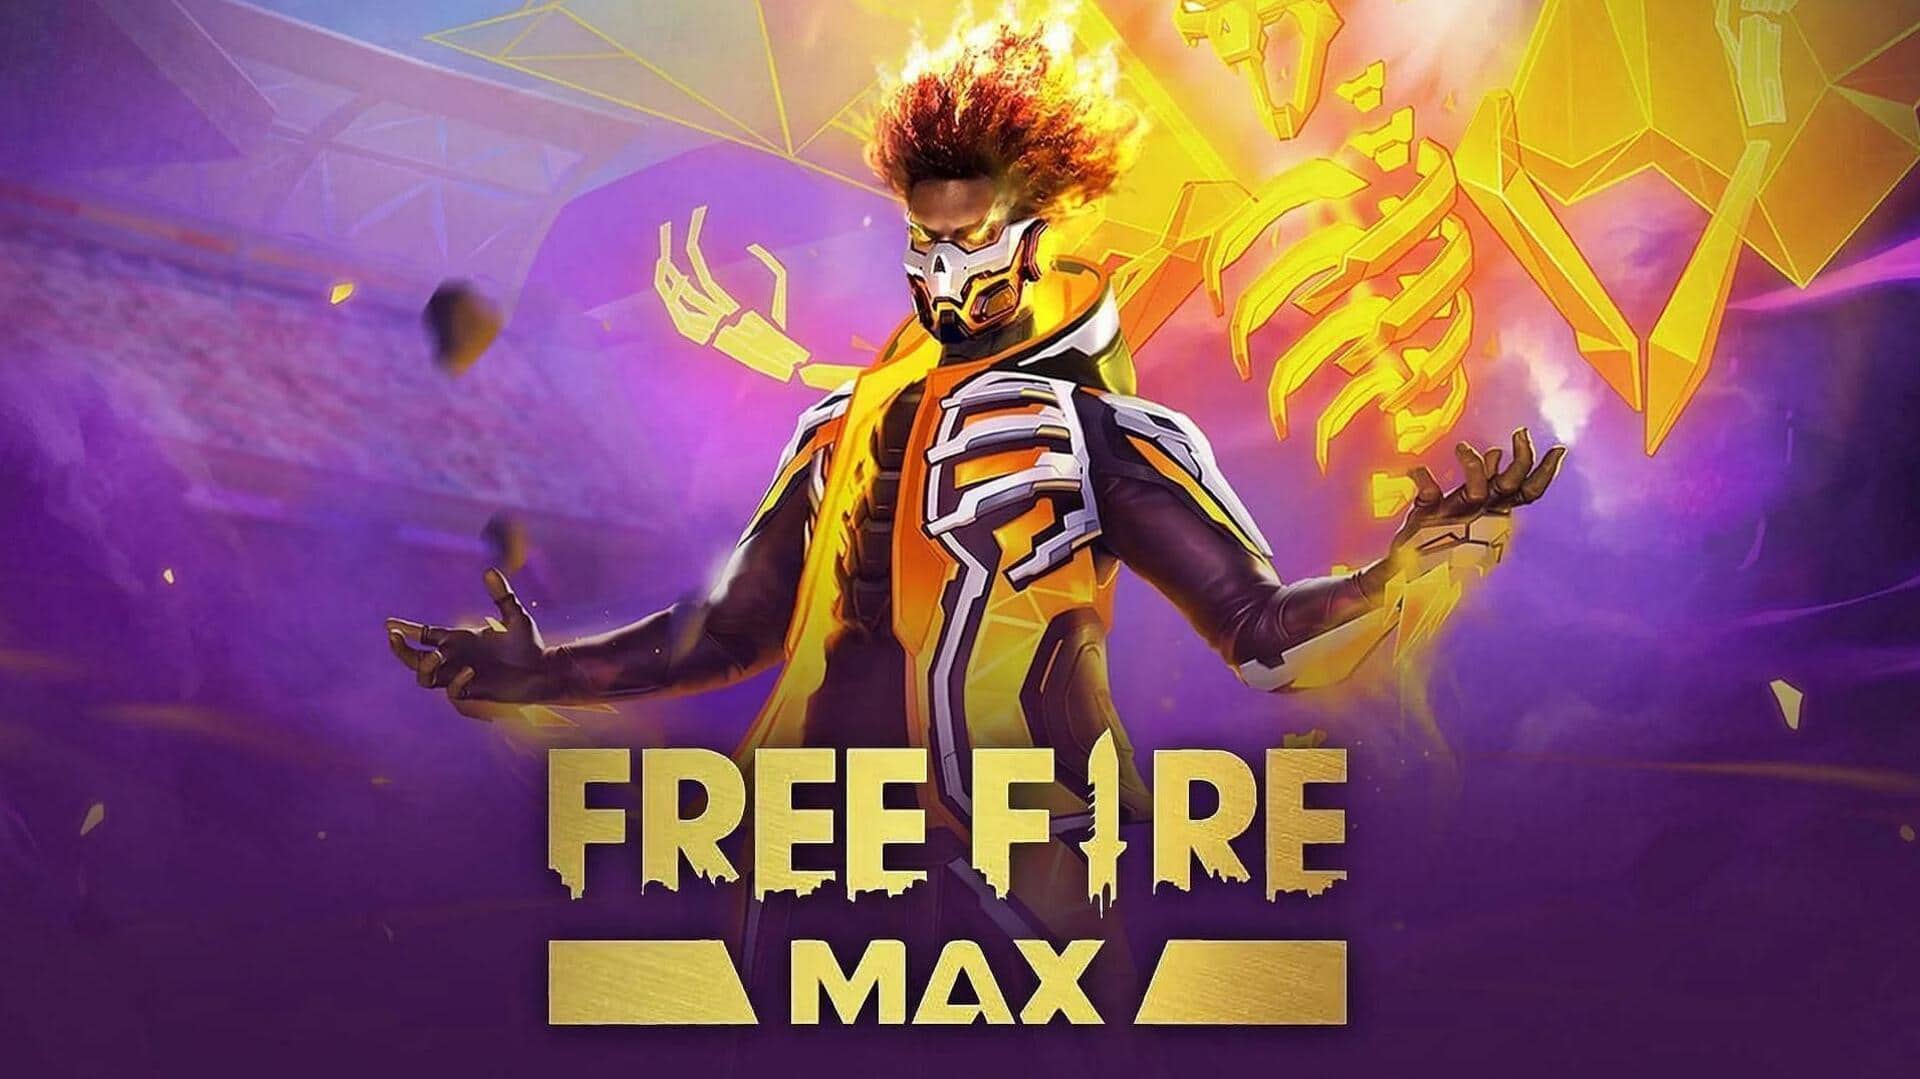 Garena Free Fire MAX codes for September 11